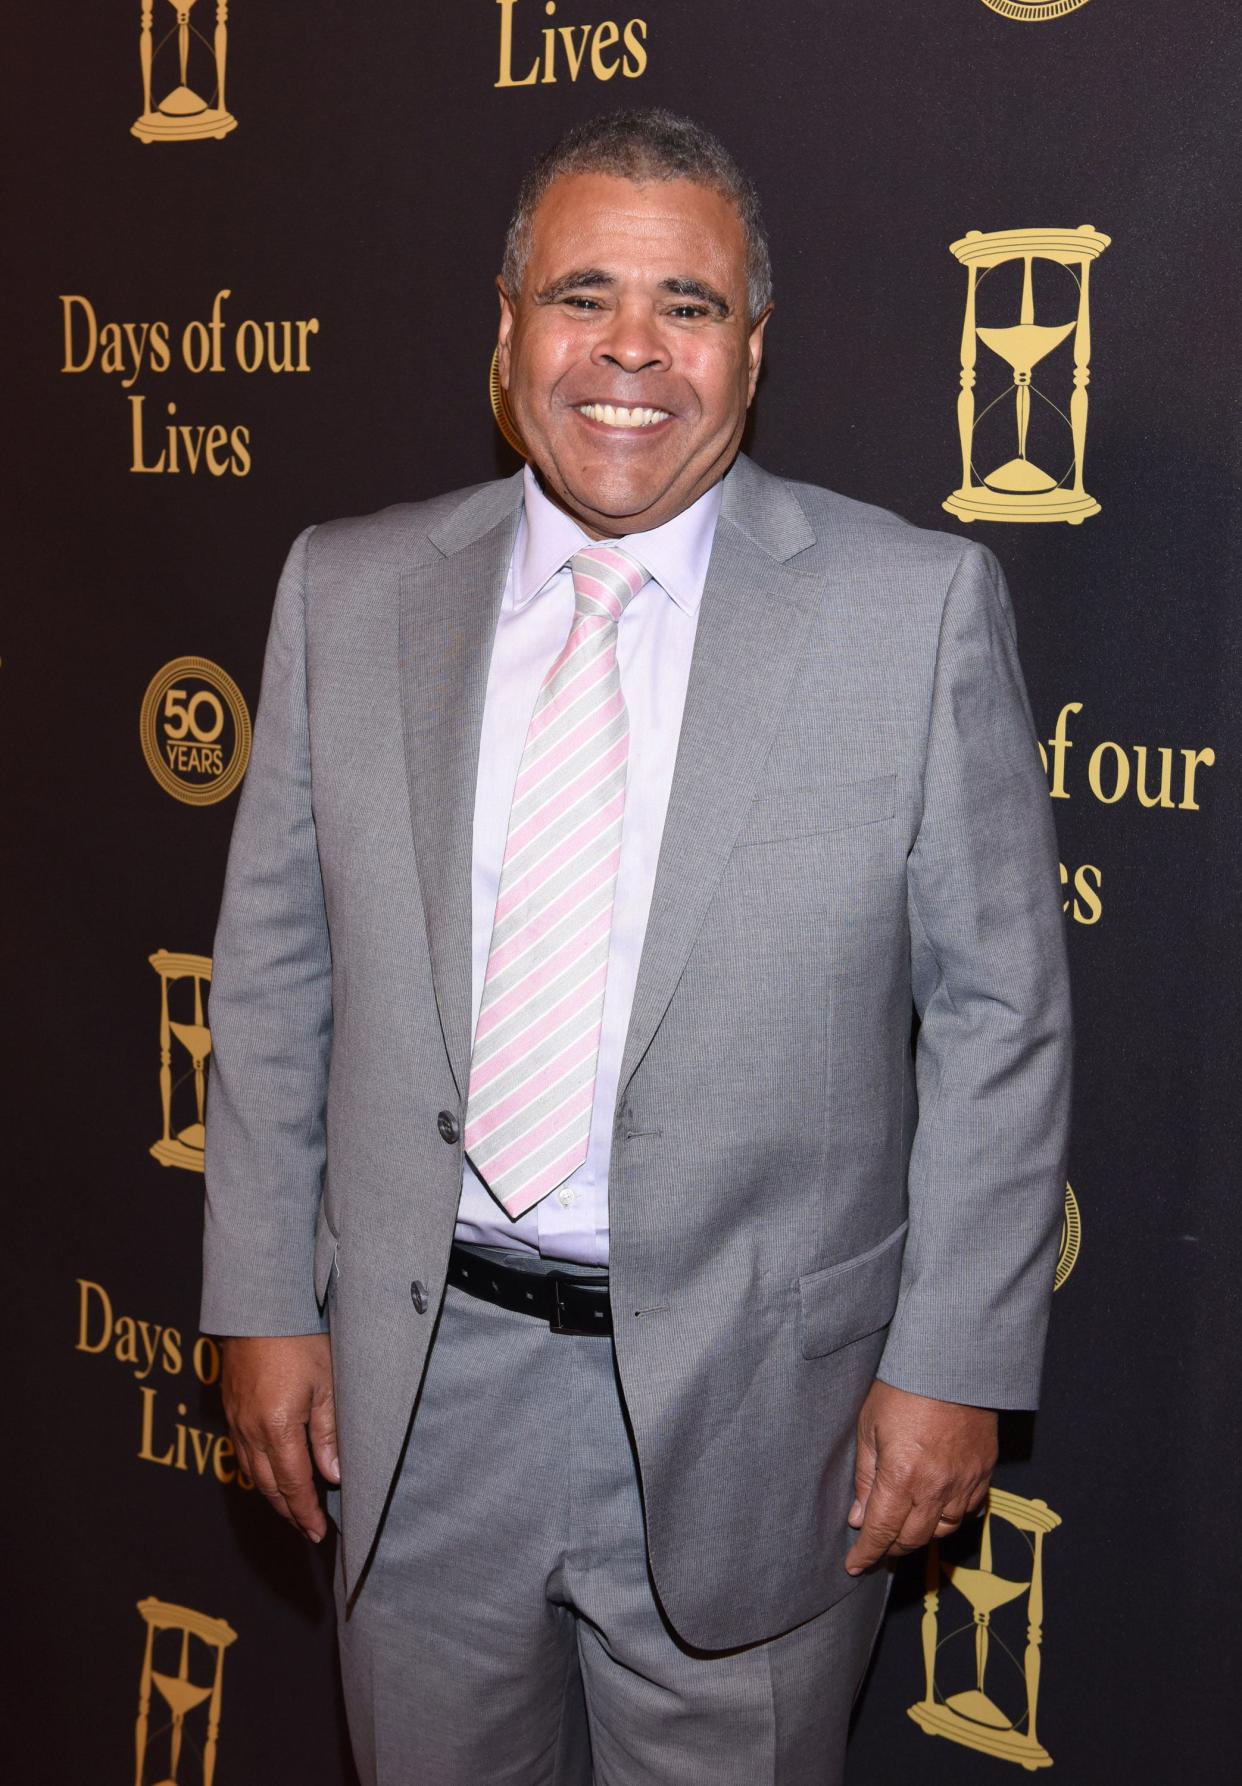 Albert Alarr, the former "Days of Our Lives" executive producer, is being sued by the show's longtime star for alleged sexual harrassment.